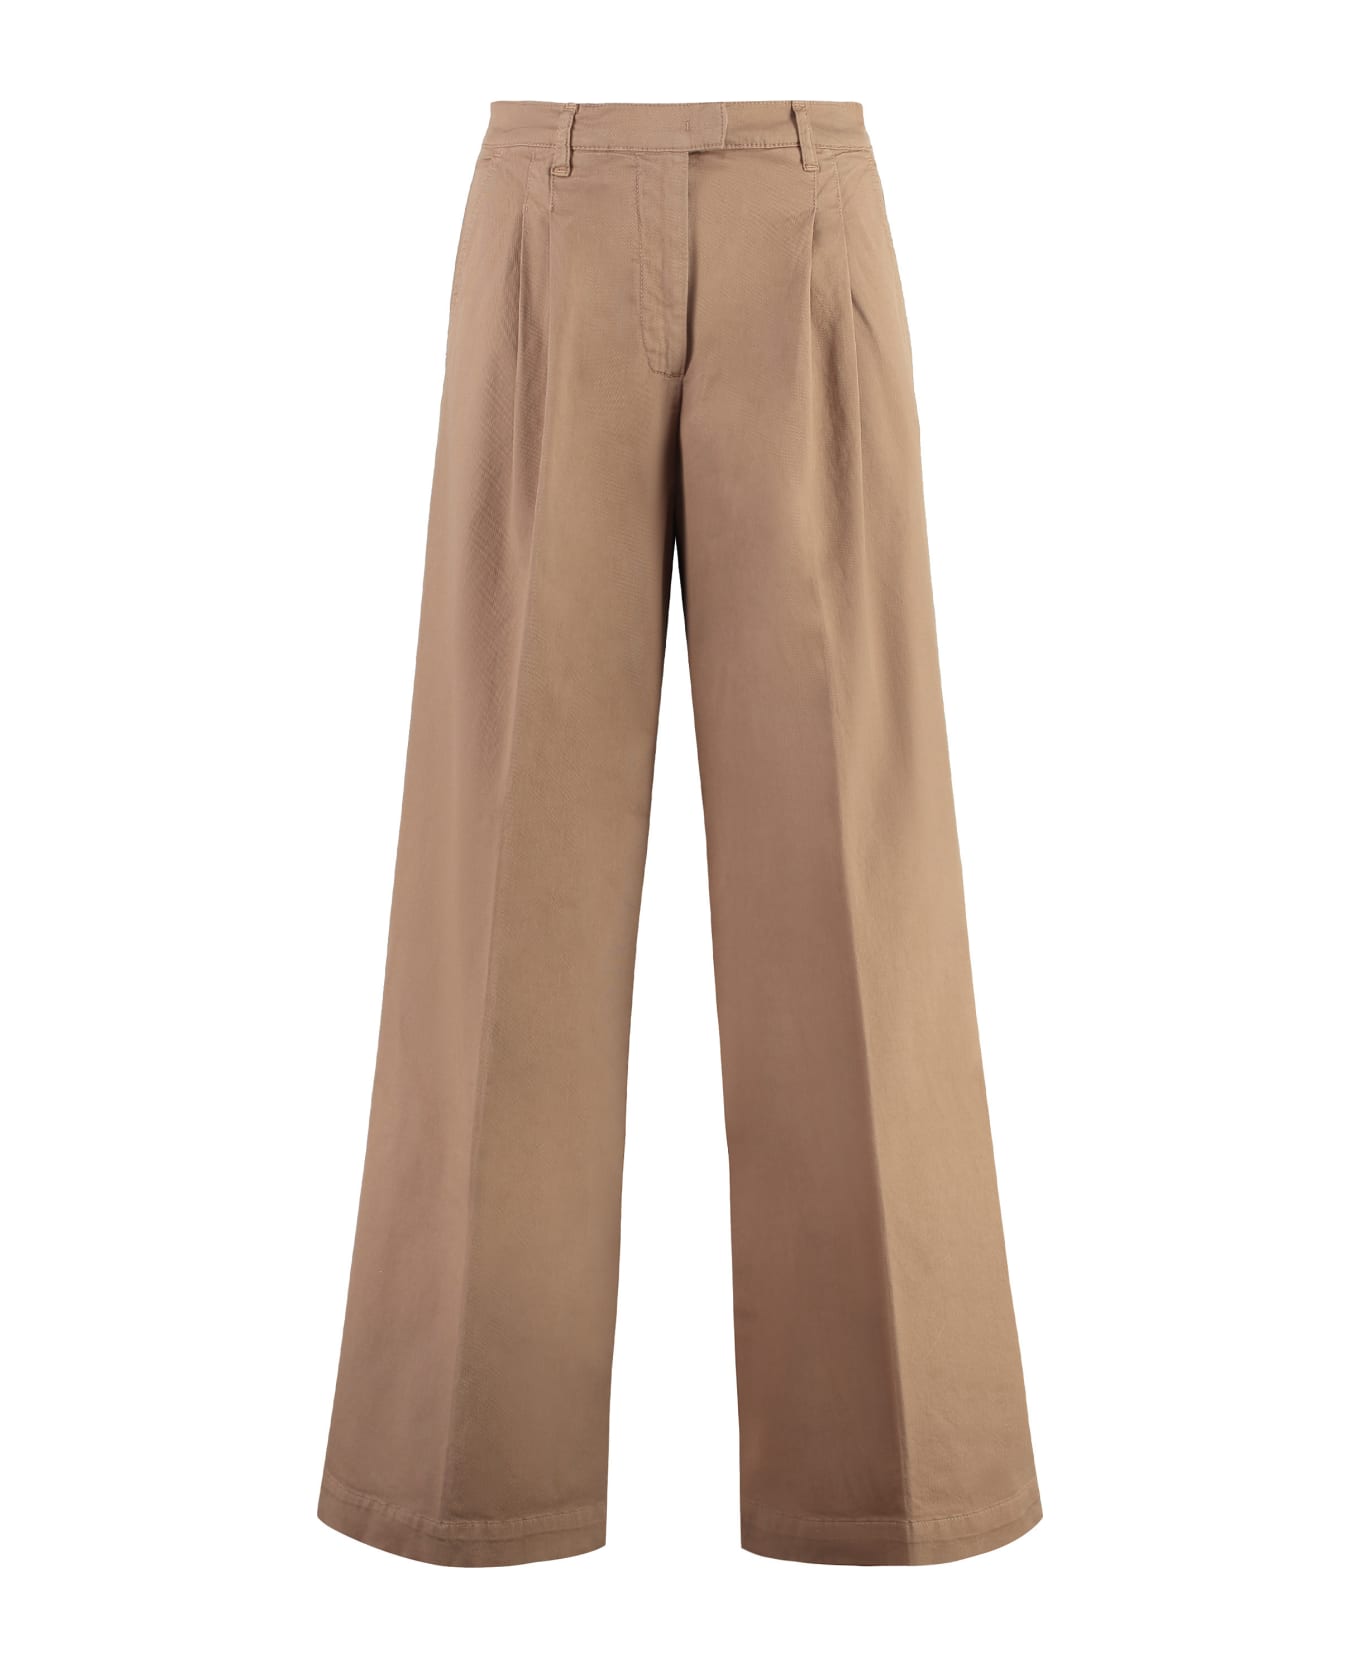 Pinko Robotech Cotton Trousers - Beige ボトムス